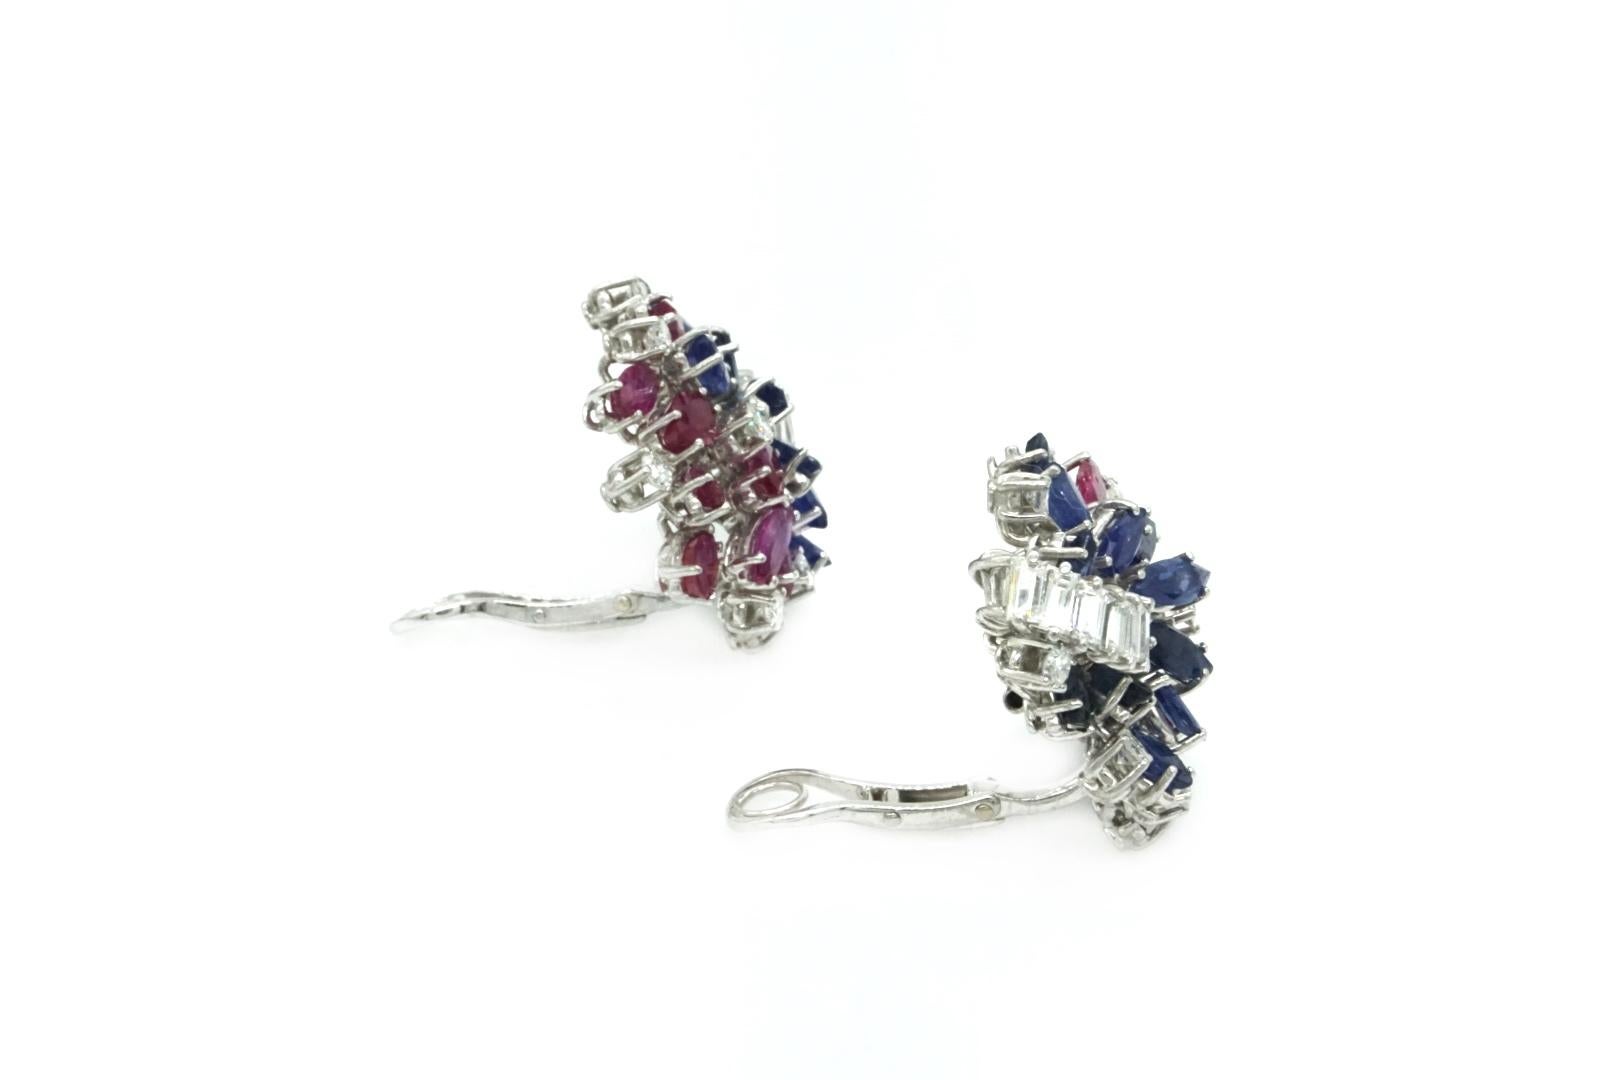 A Pair of 1950s Earclips in white gold with diamonds, sapphires and rubies mounted on 18k white gold. 